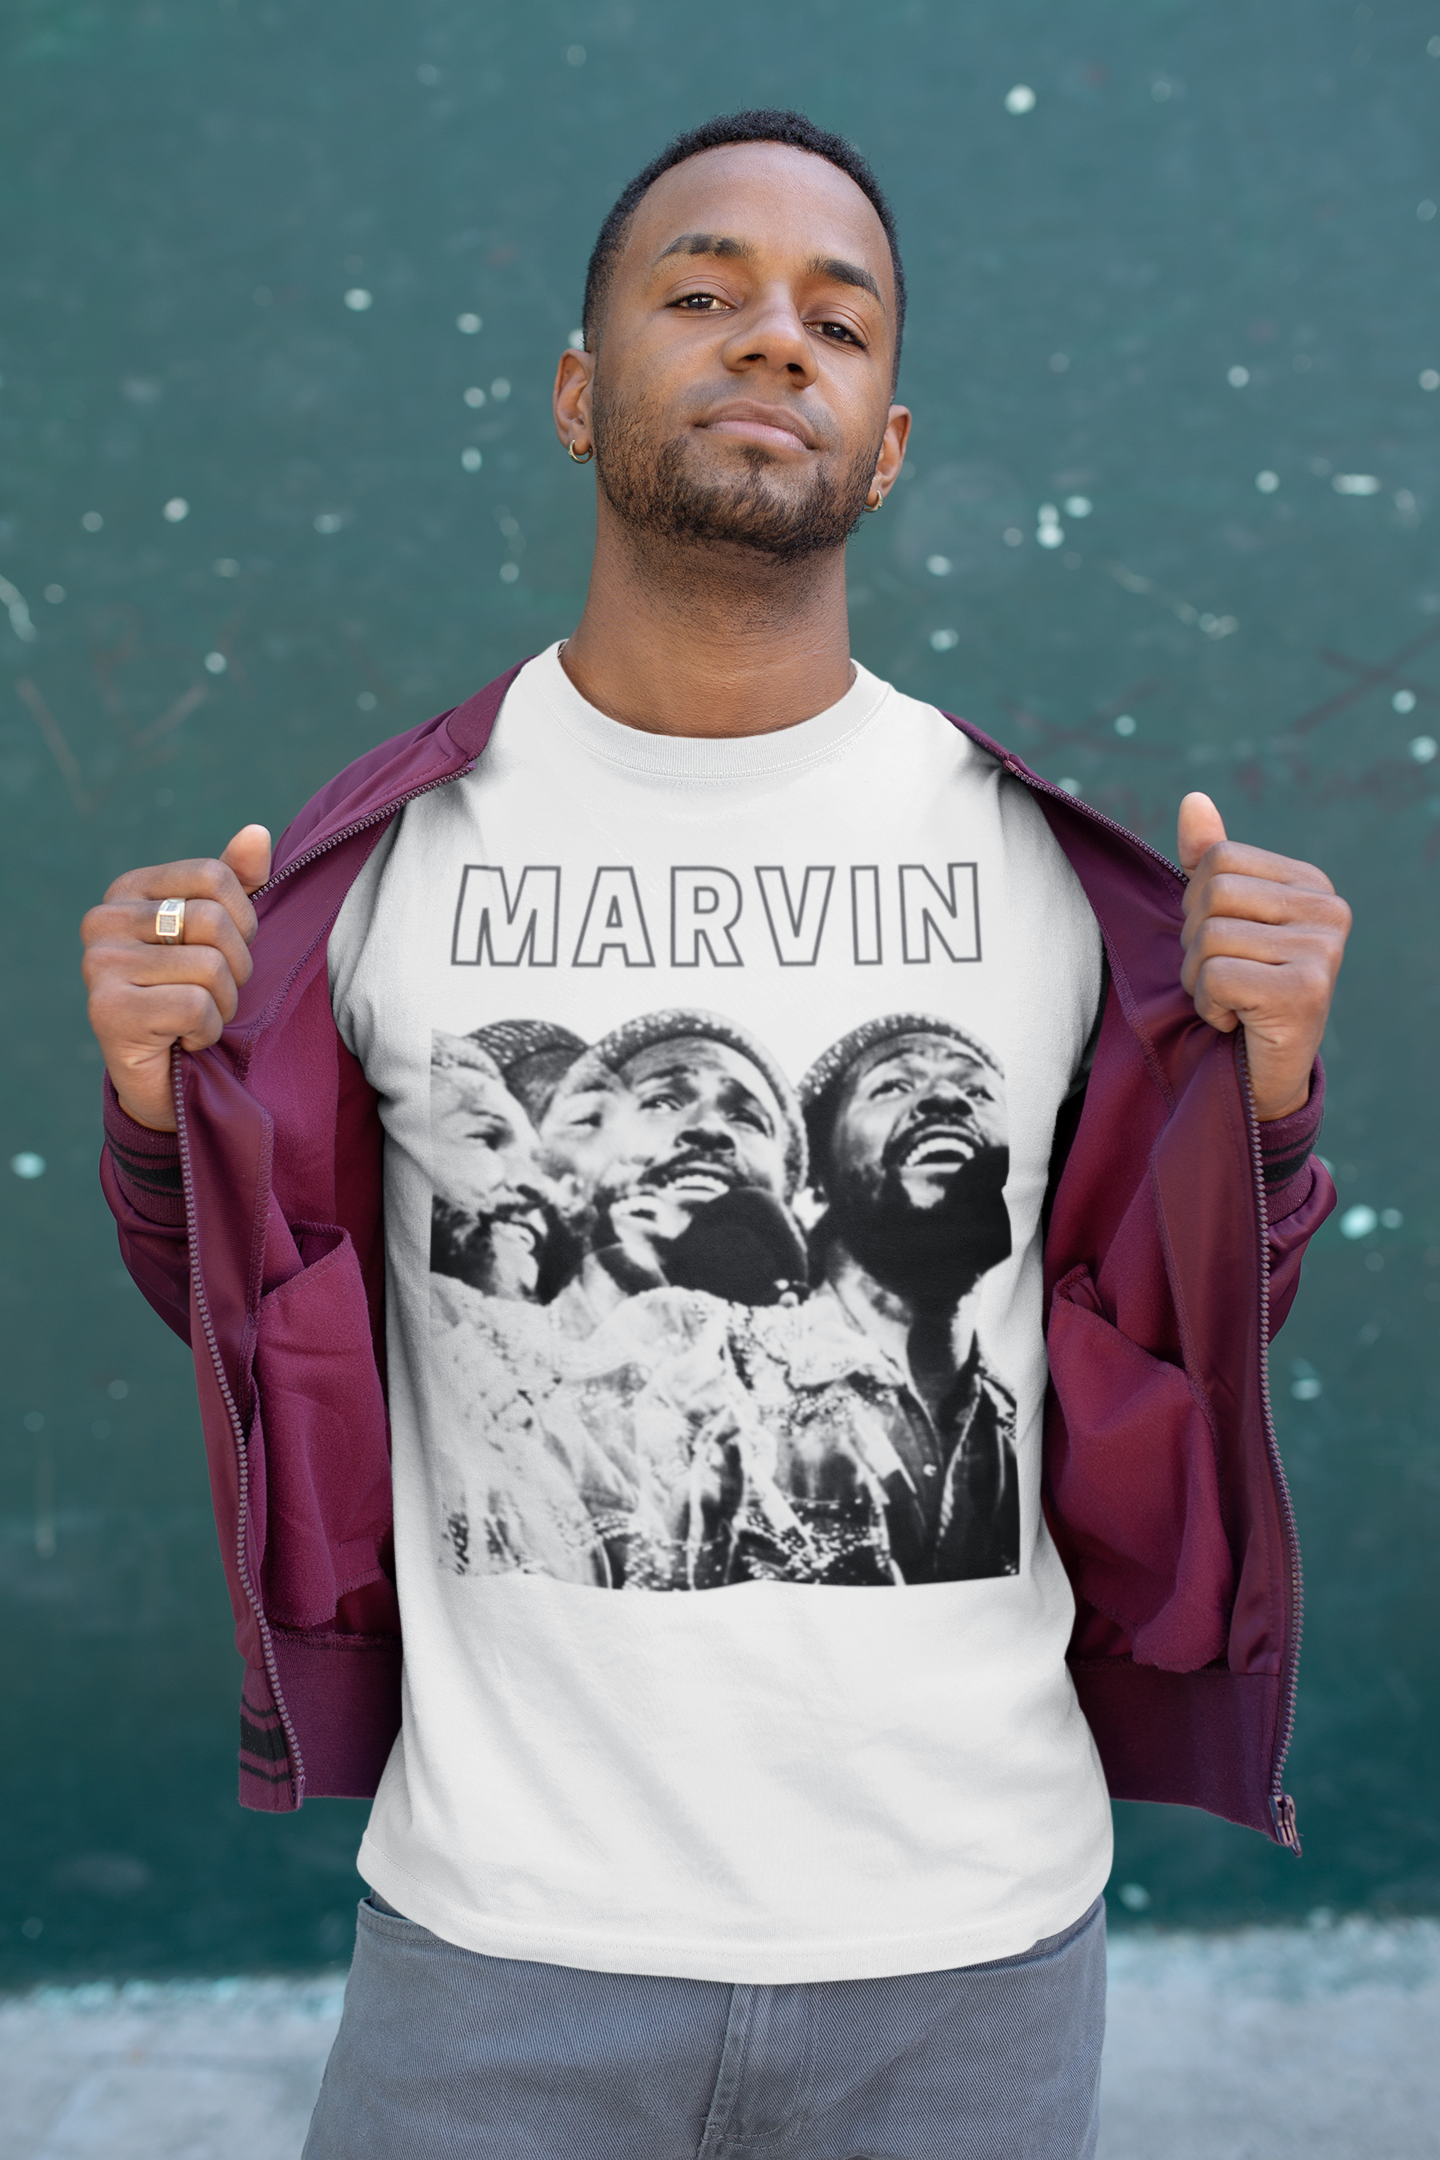 MARVIN Classic Fit AmplifyDestroy Print Tee Shirt